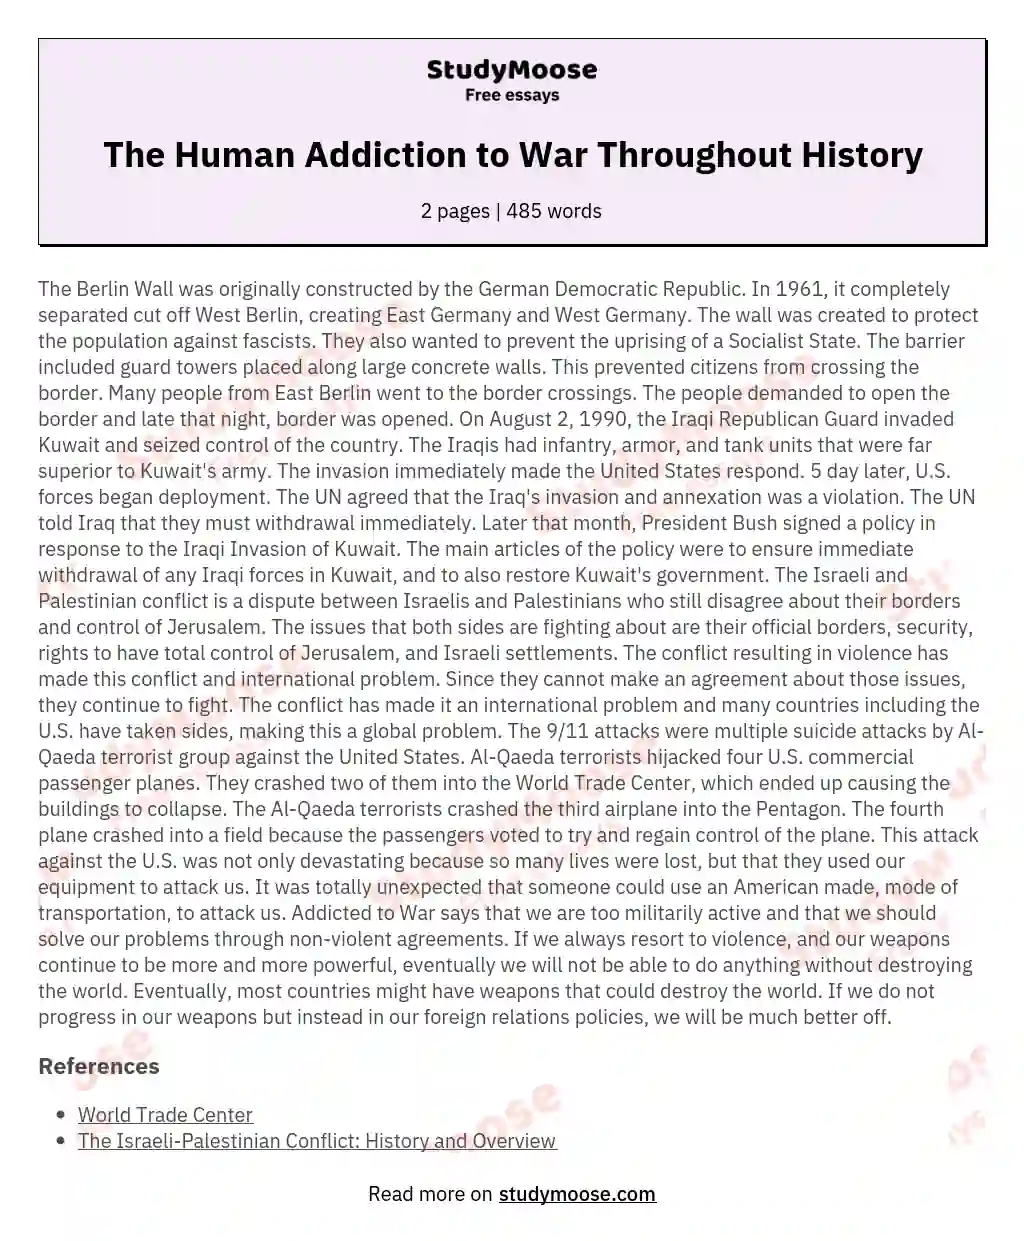 The Human Addiction to War Throughout History essay